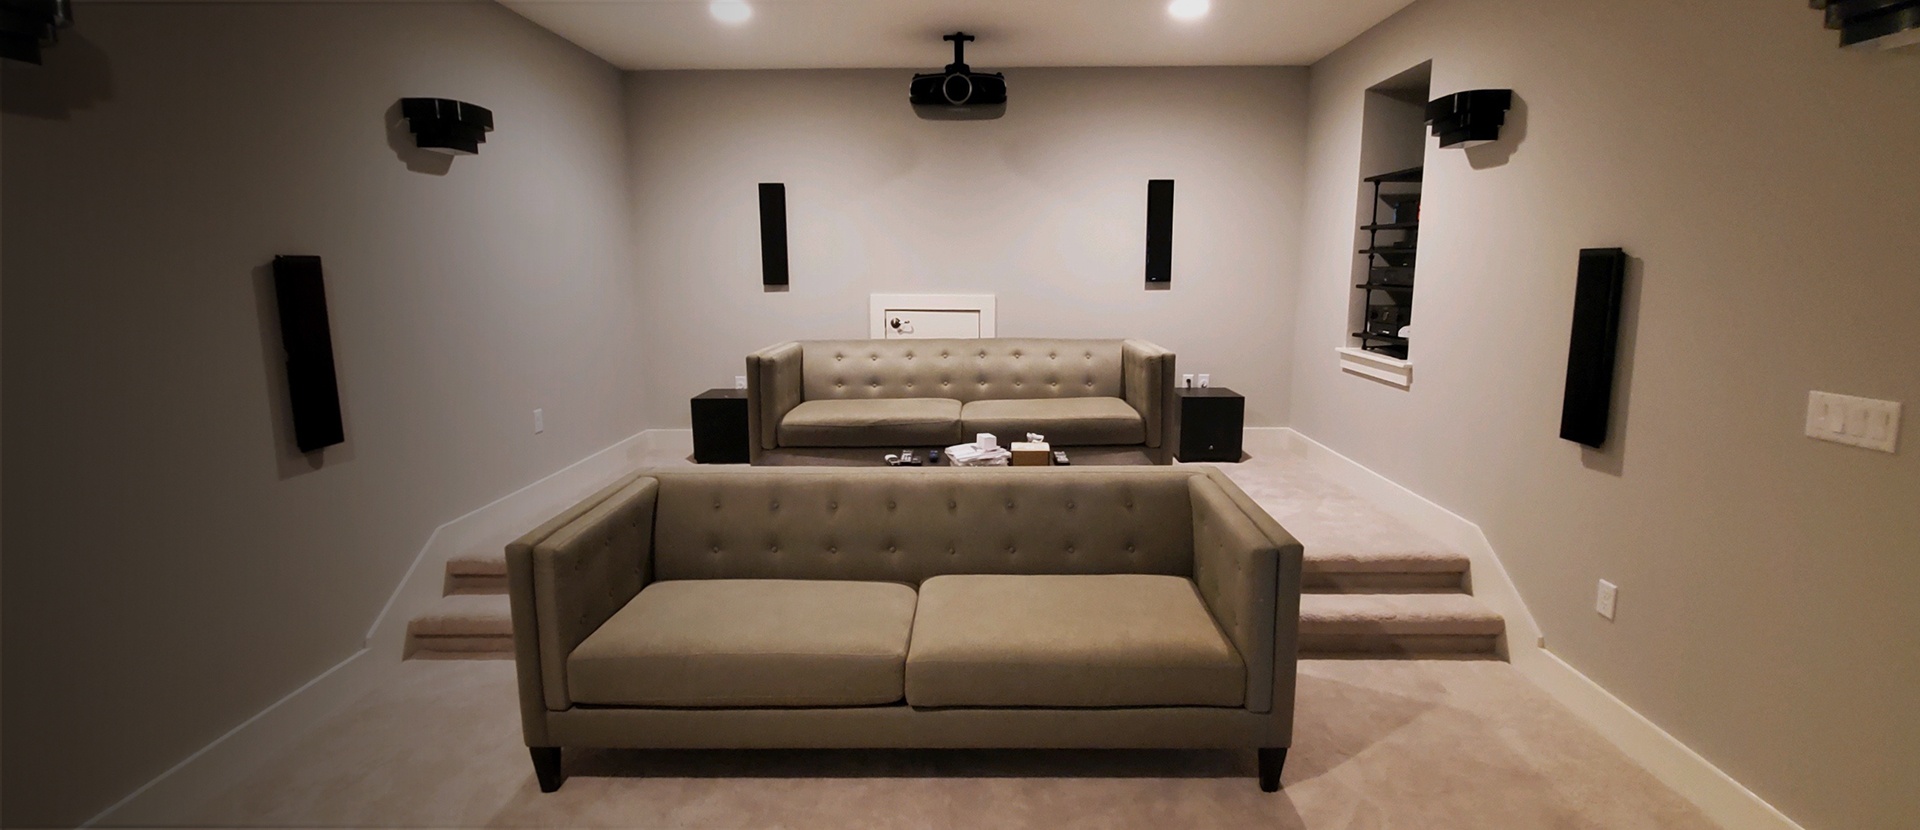 Austin based AV Connect will revolutionize your AV Entertainment and Automation Experience